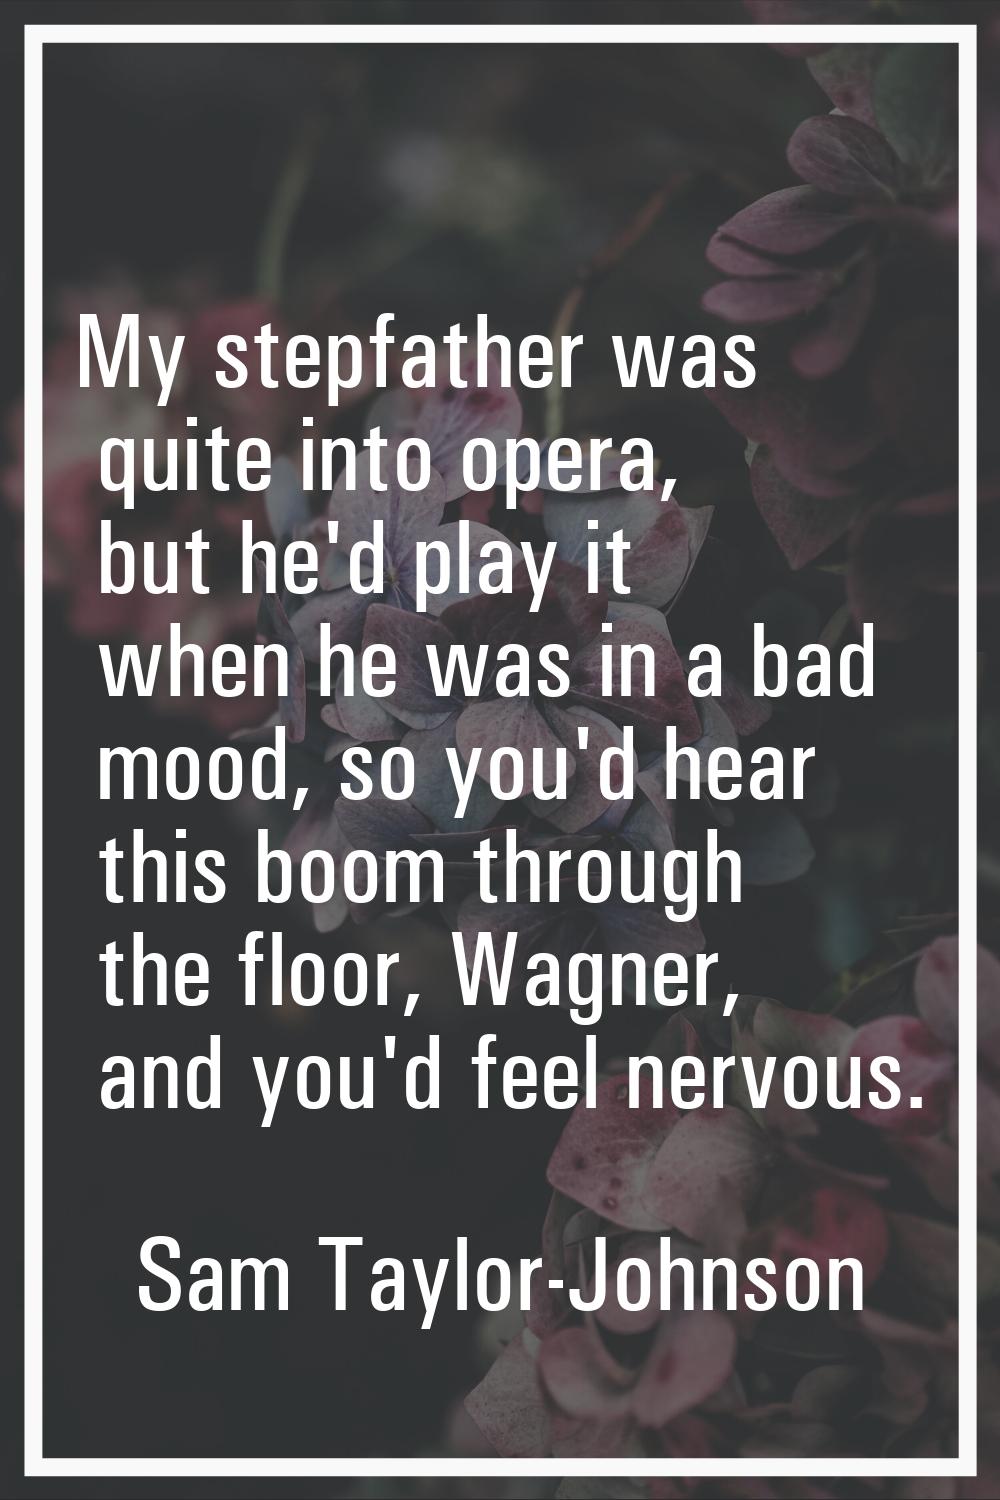 My stepfather was quite into opera, but he'd play it when he was in a bad mood, so you'd hear this 